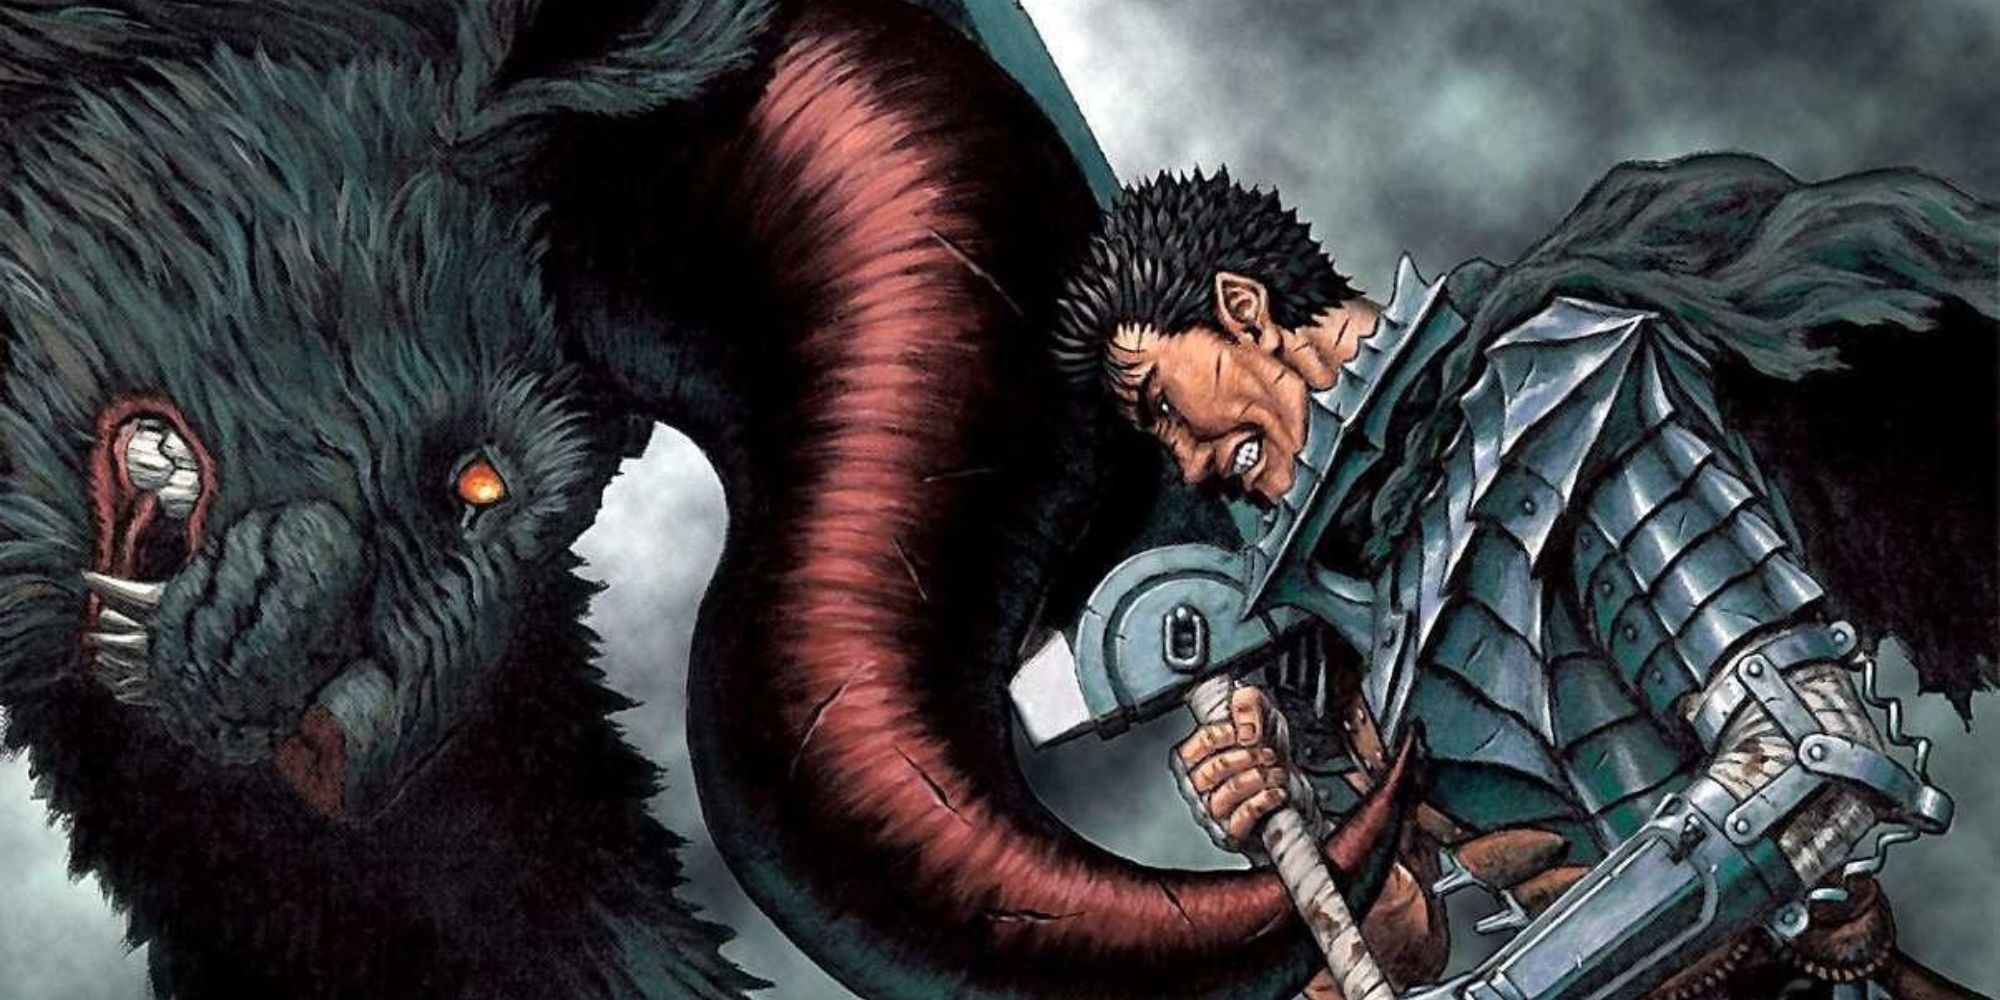 Guts best written anime characters of all times